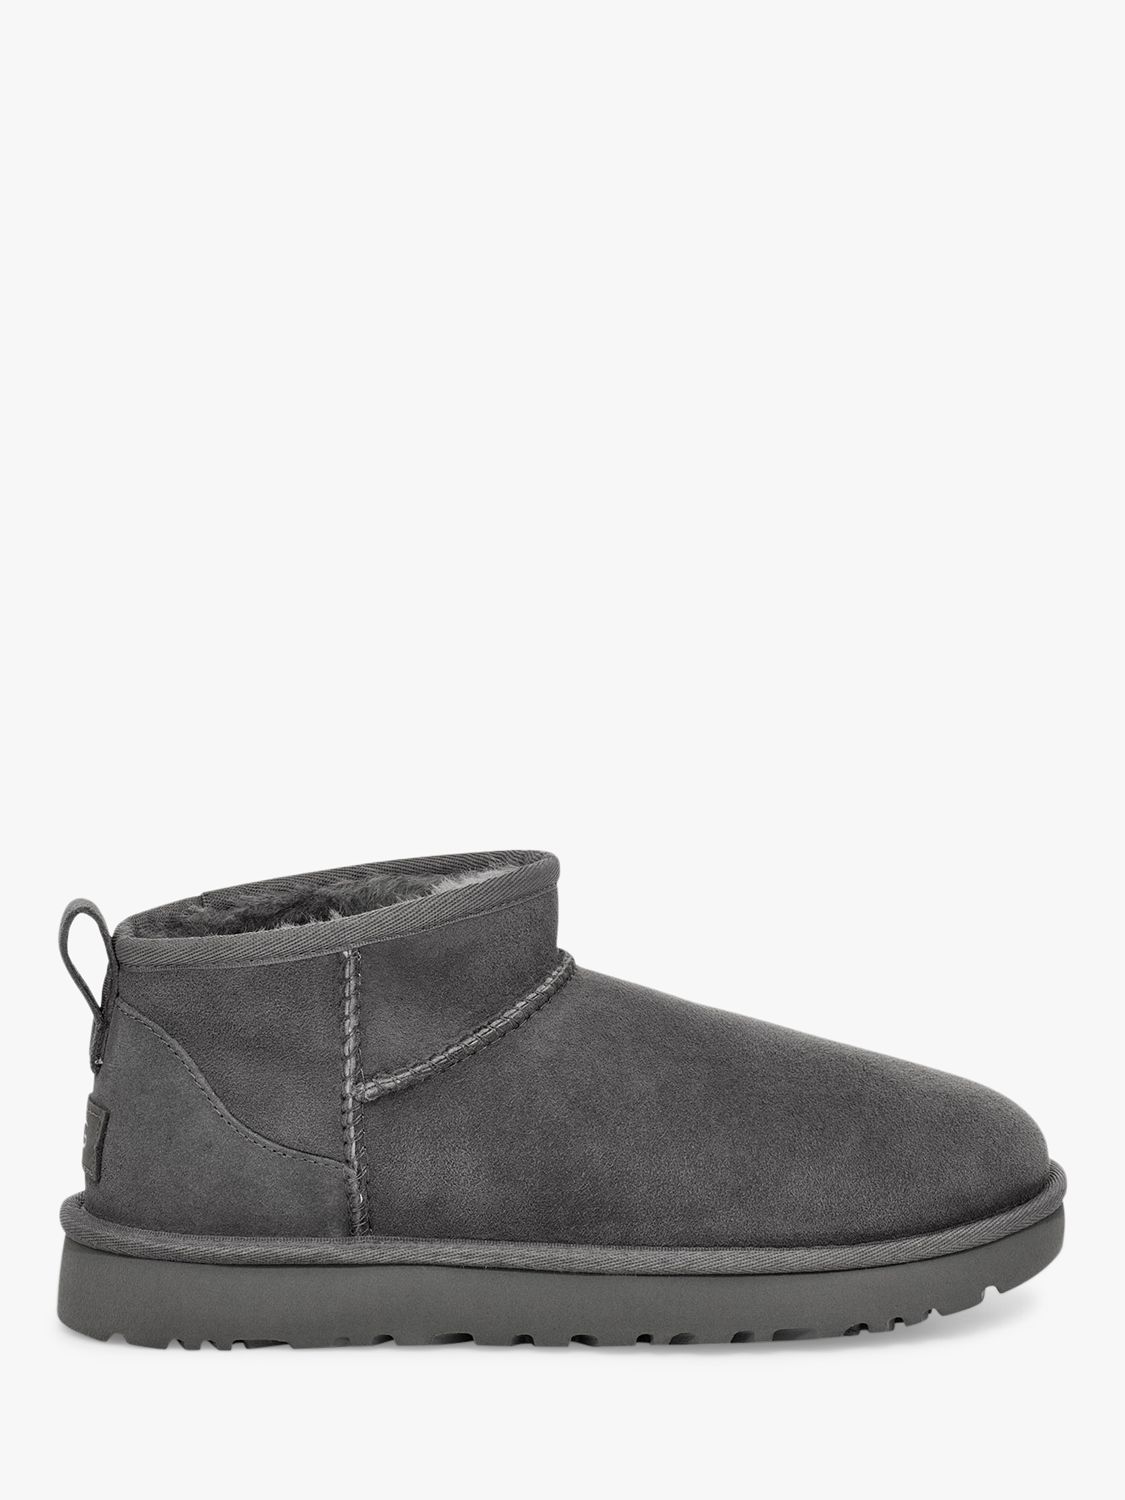 UGG Classic Ultra Mini Sheepskin and Suede Ankle Boots, Grey at John ...